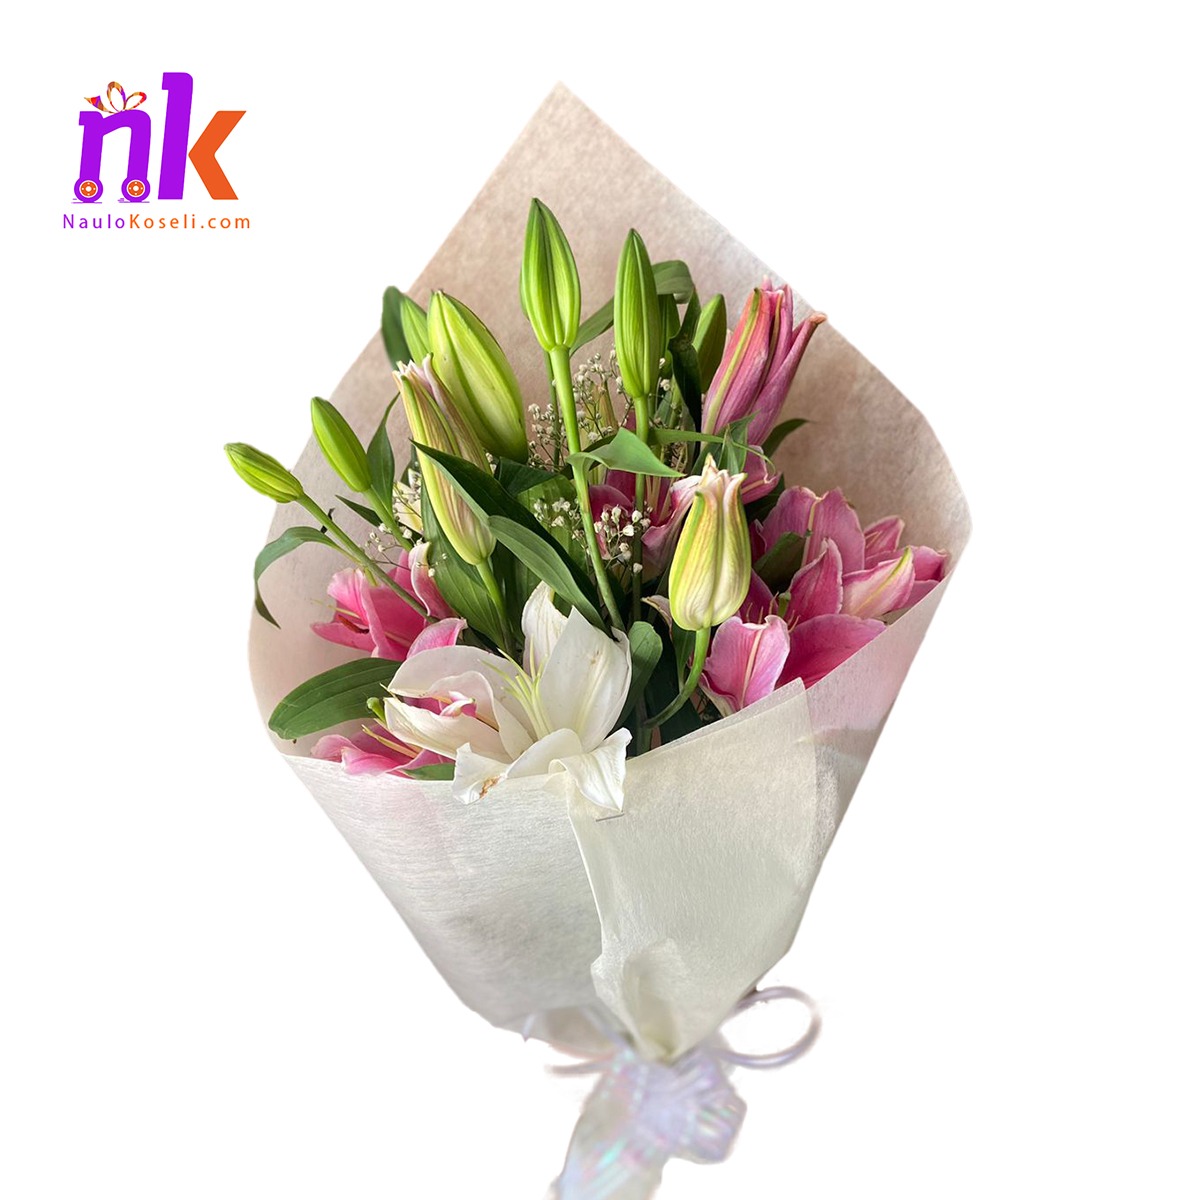 Lily flower bouquet